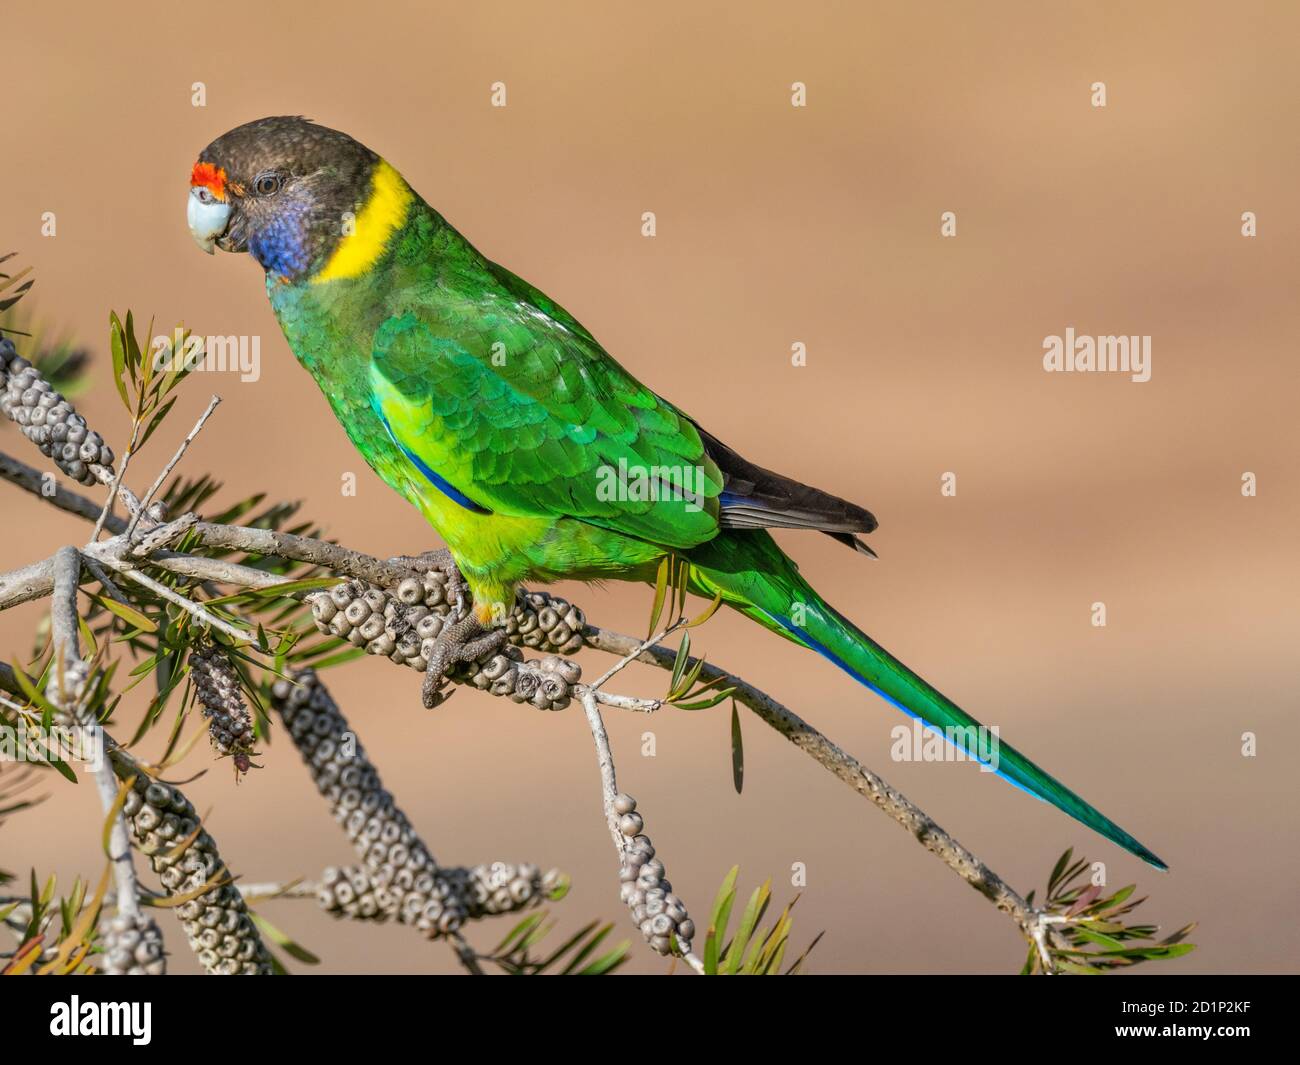 An Australian Ringneck of the western race, known as the Twenty-eight Parrot, photographed in a forest of South Western Australia. Stock Photo